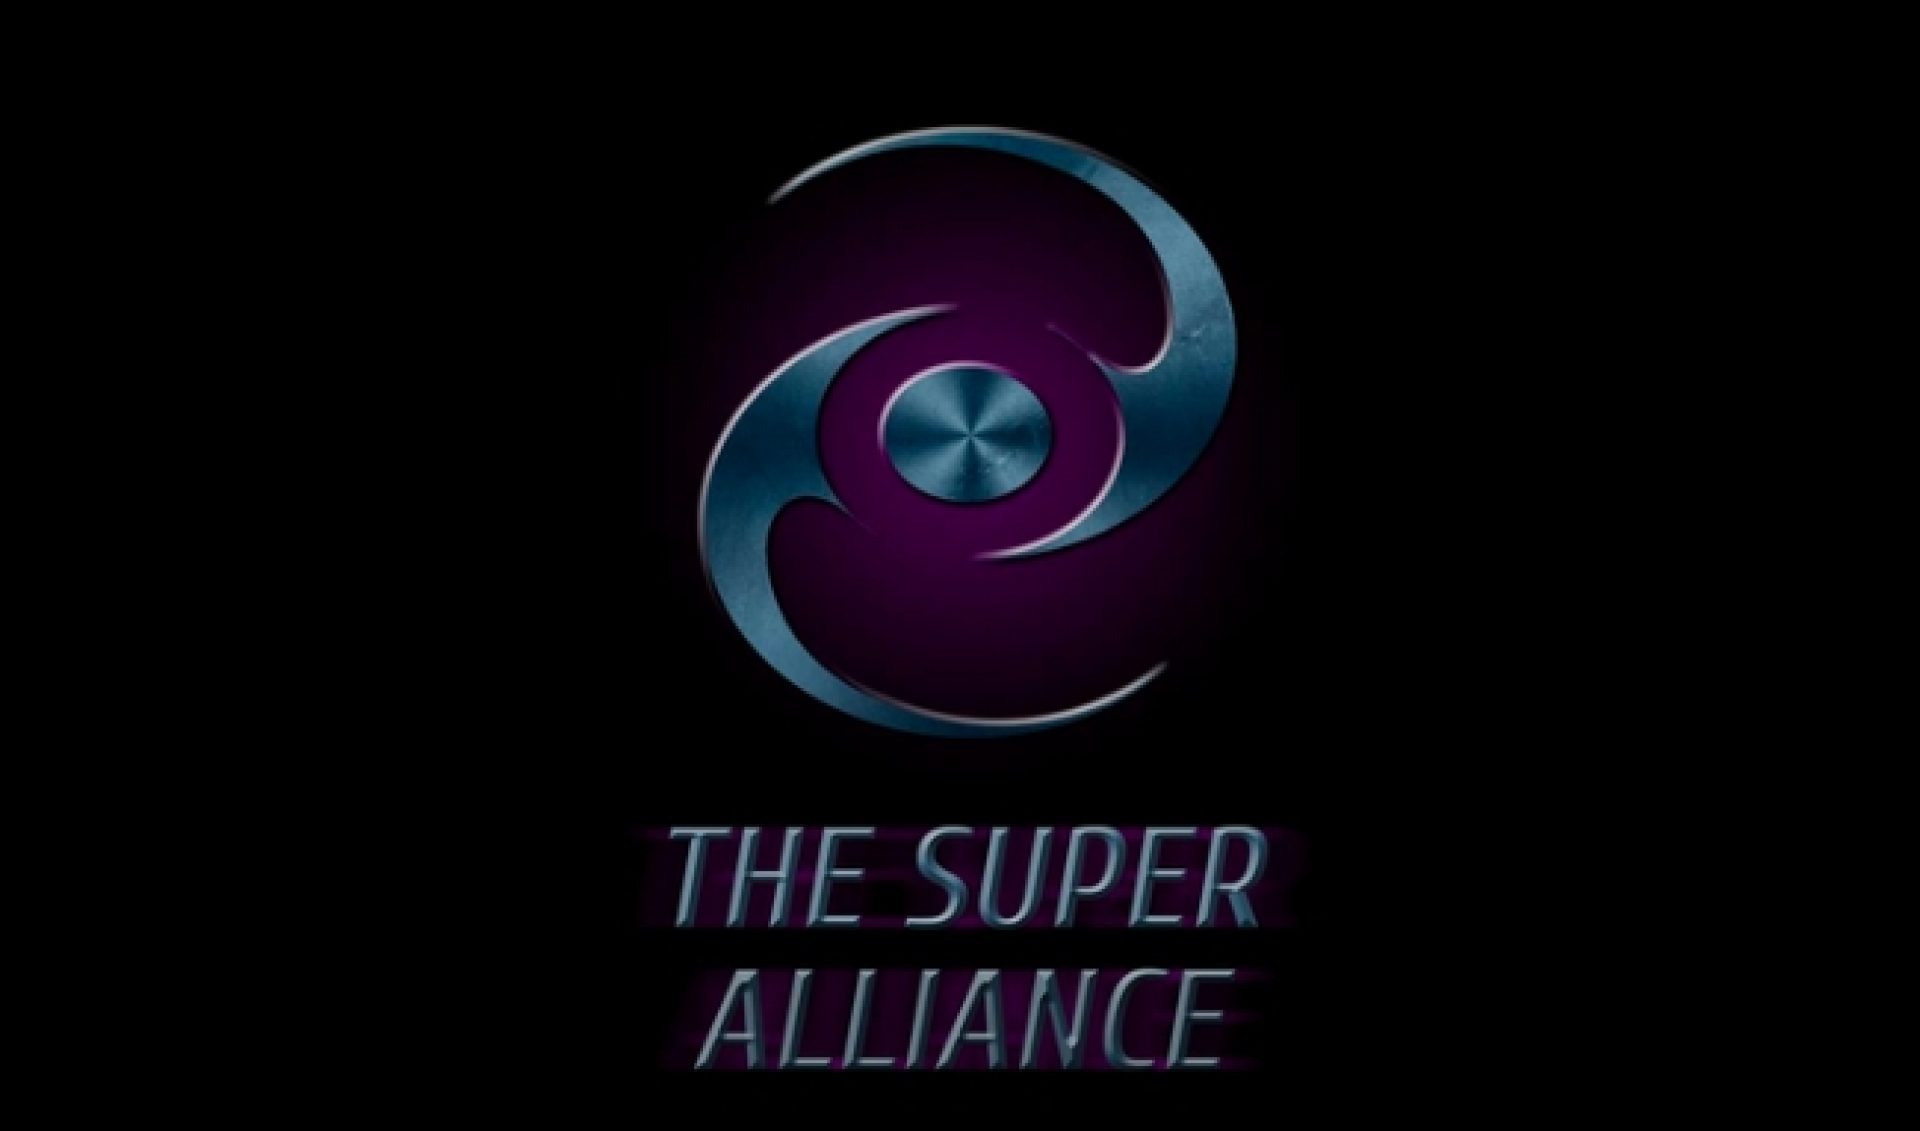 Fund This: ‘The Super Alliance’ Seeks $7,000 To Shed Alter Egos